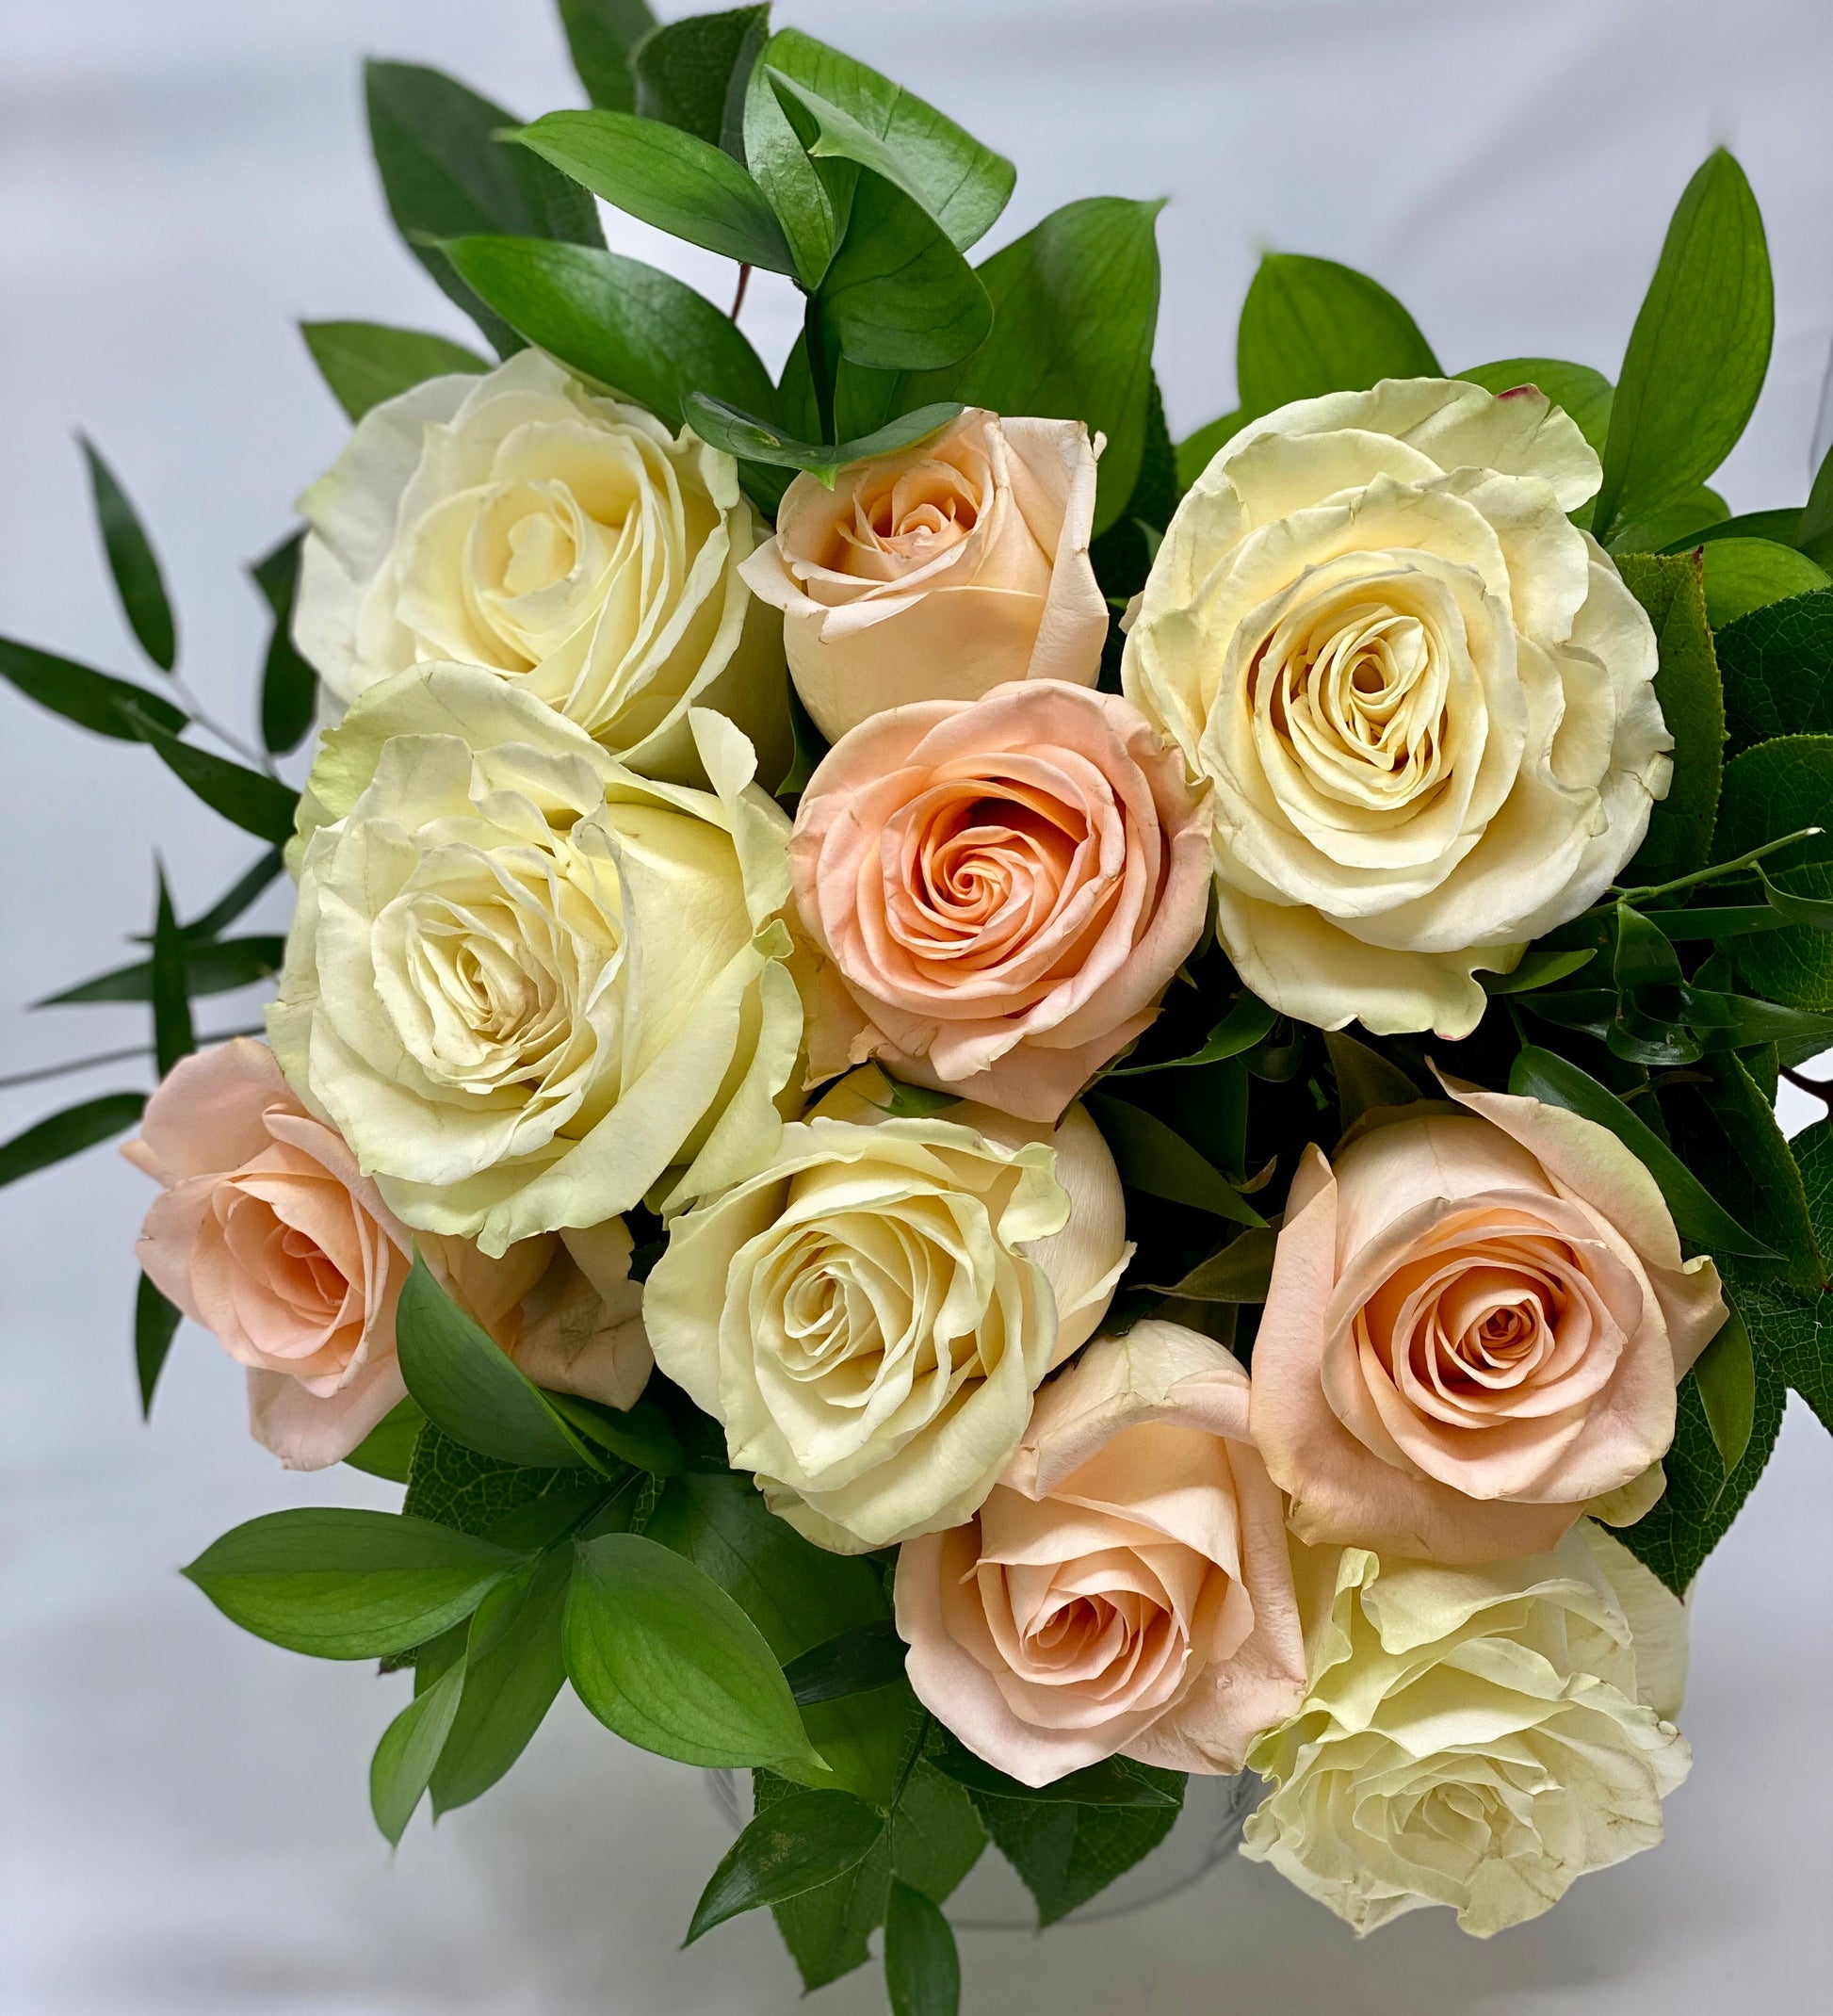 Peach and cream coloured roses arranged with greens in a bouquet